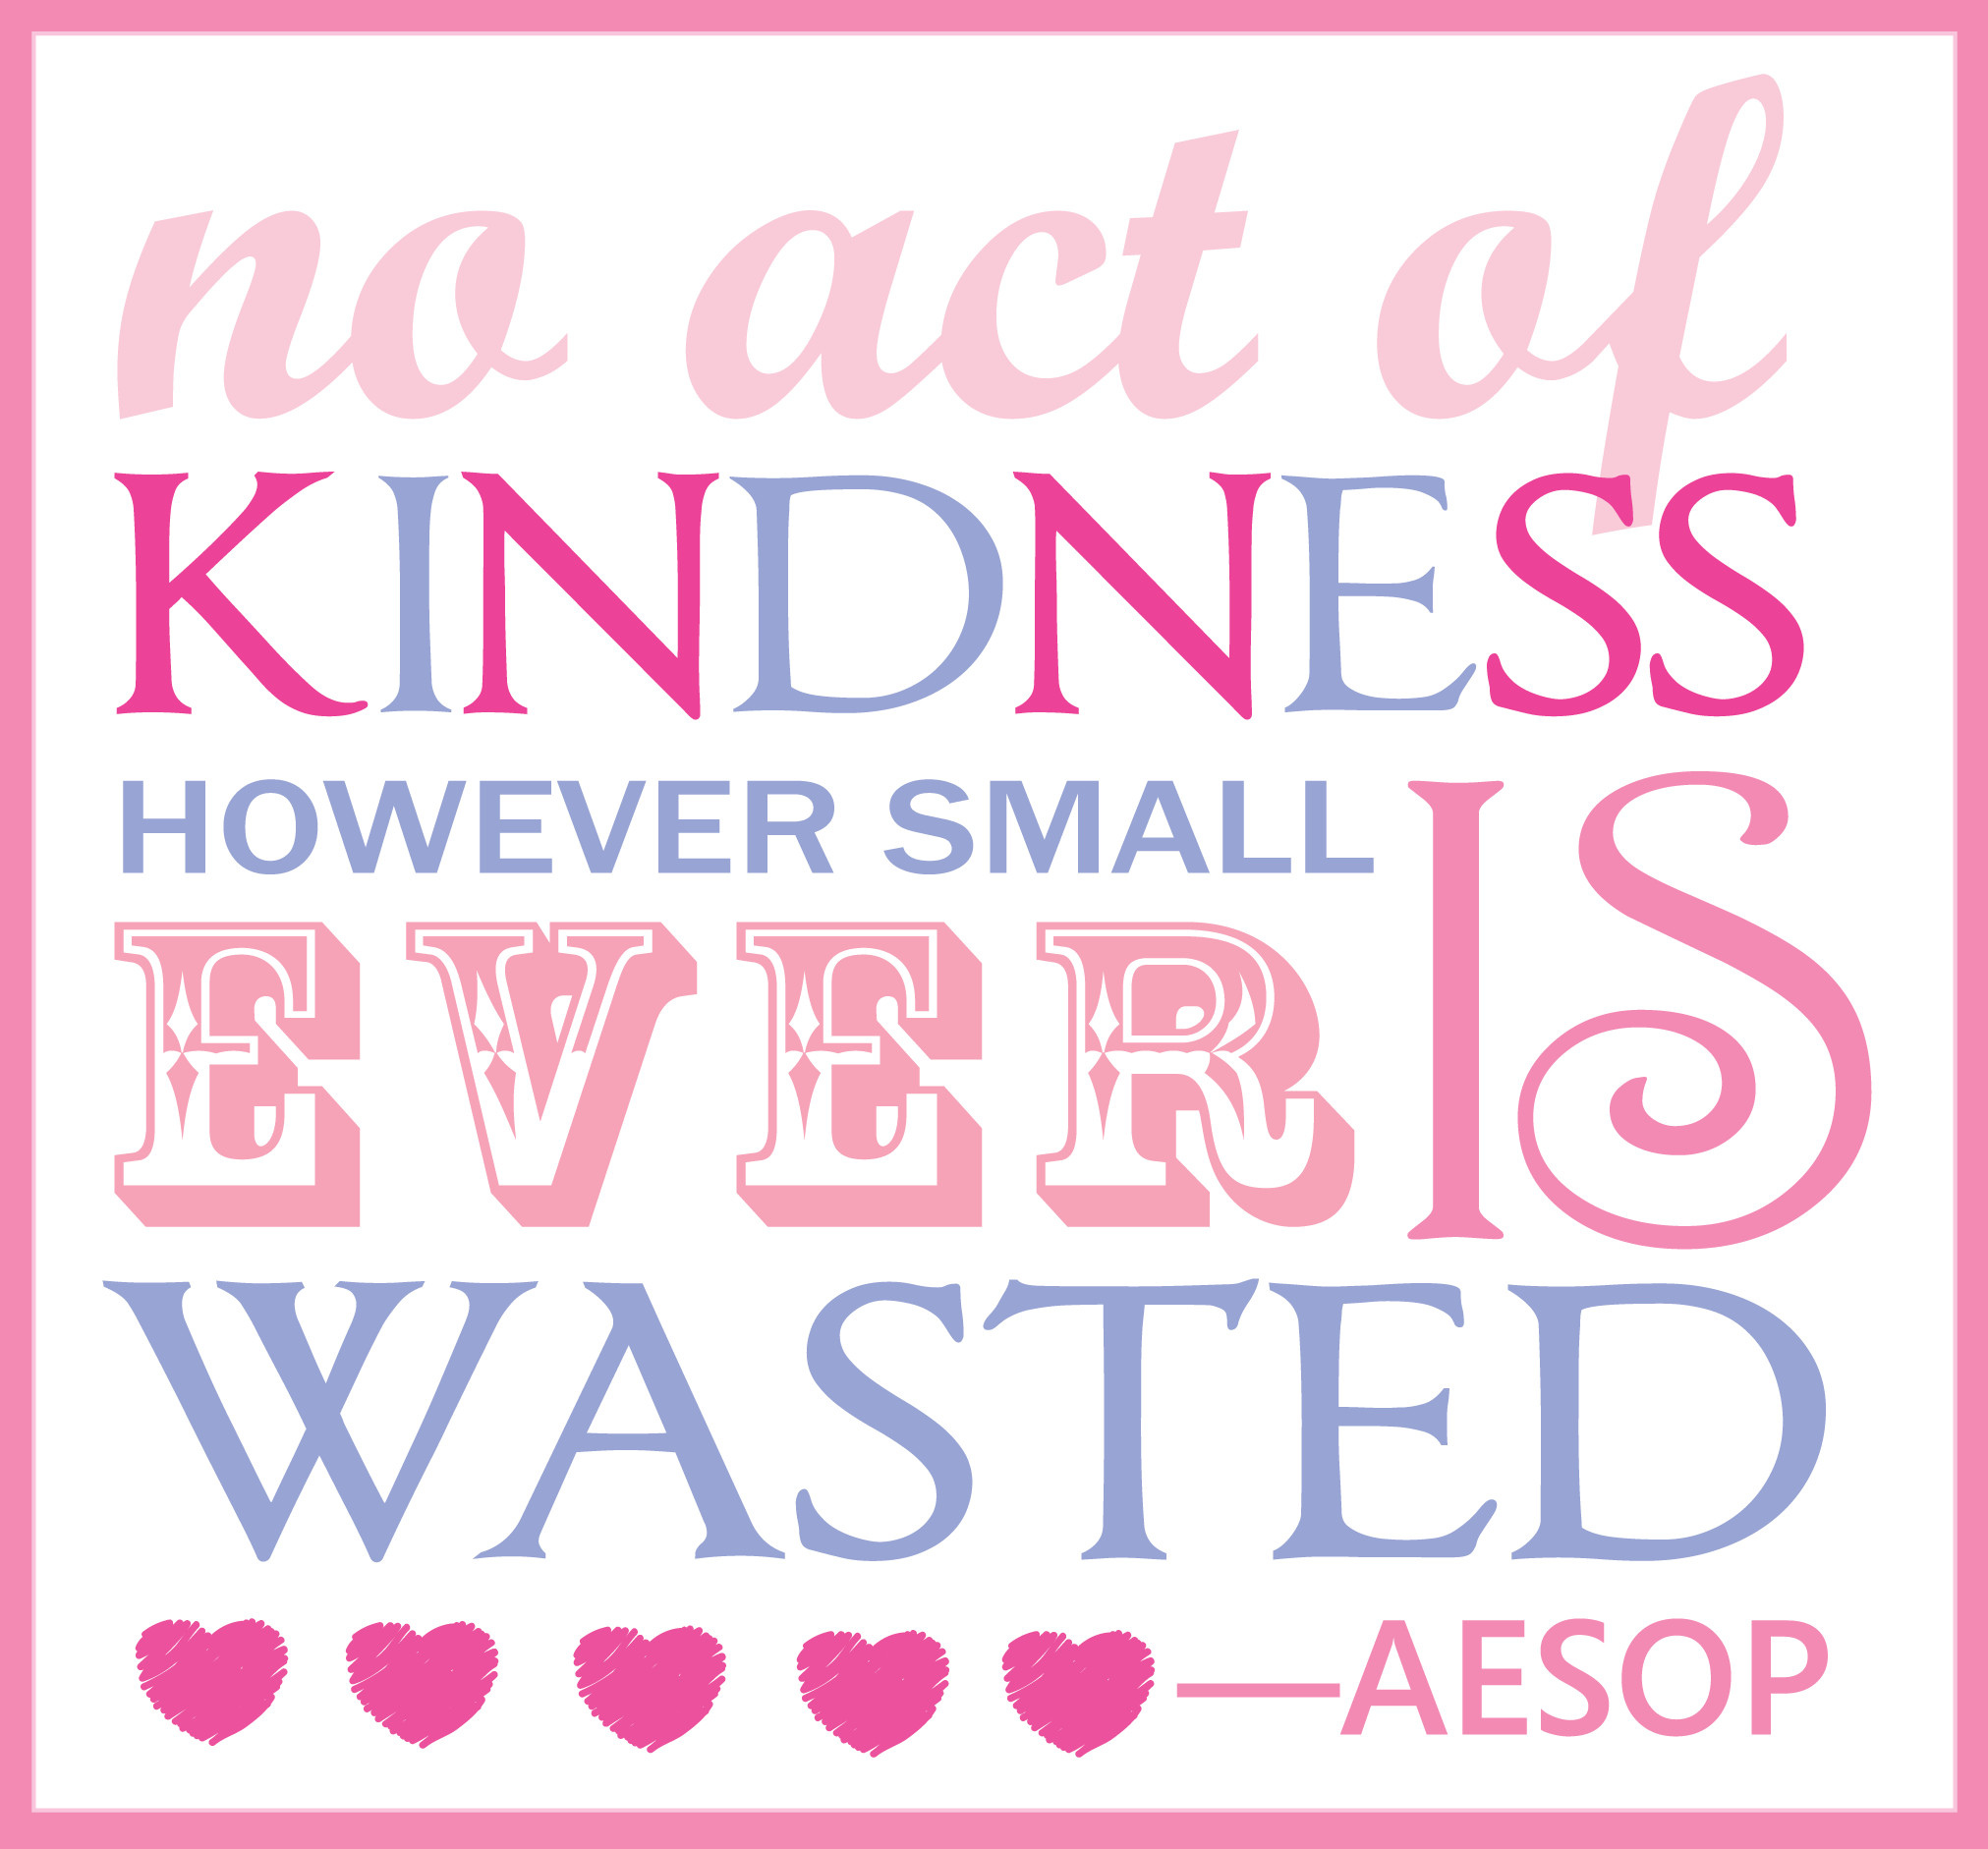 Act Of Kindness Quotes
 10 Random Acts of Kindness